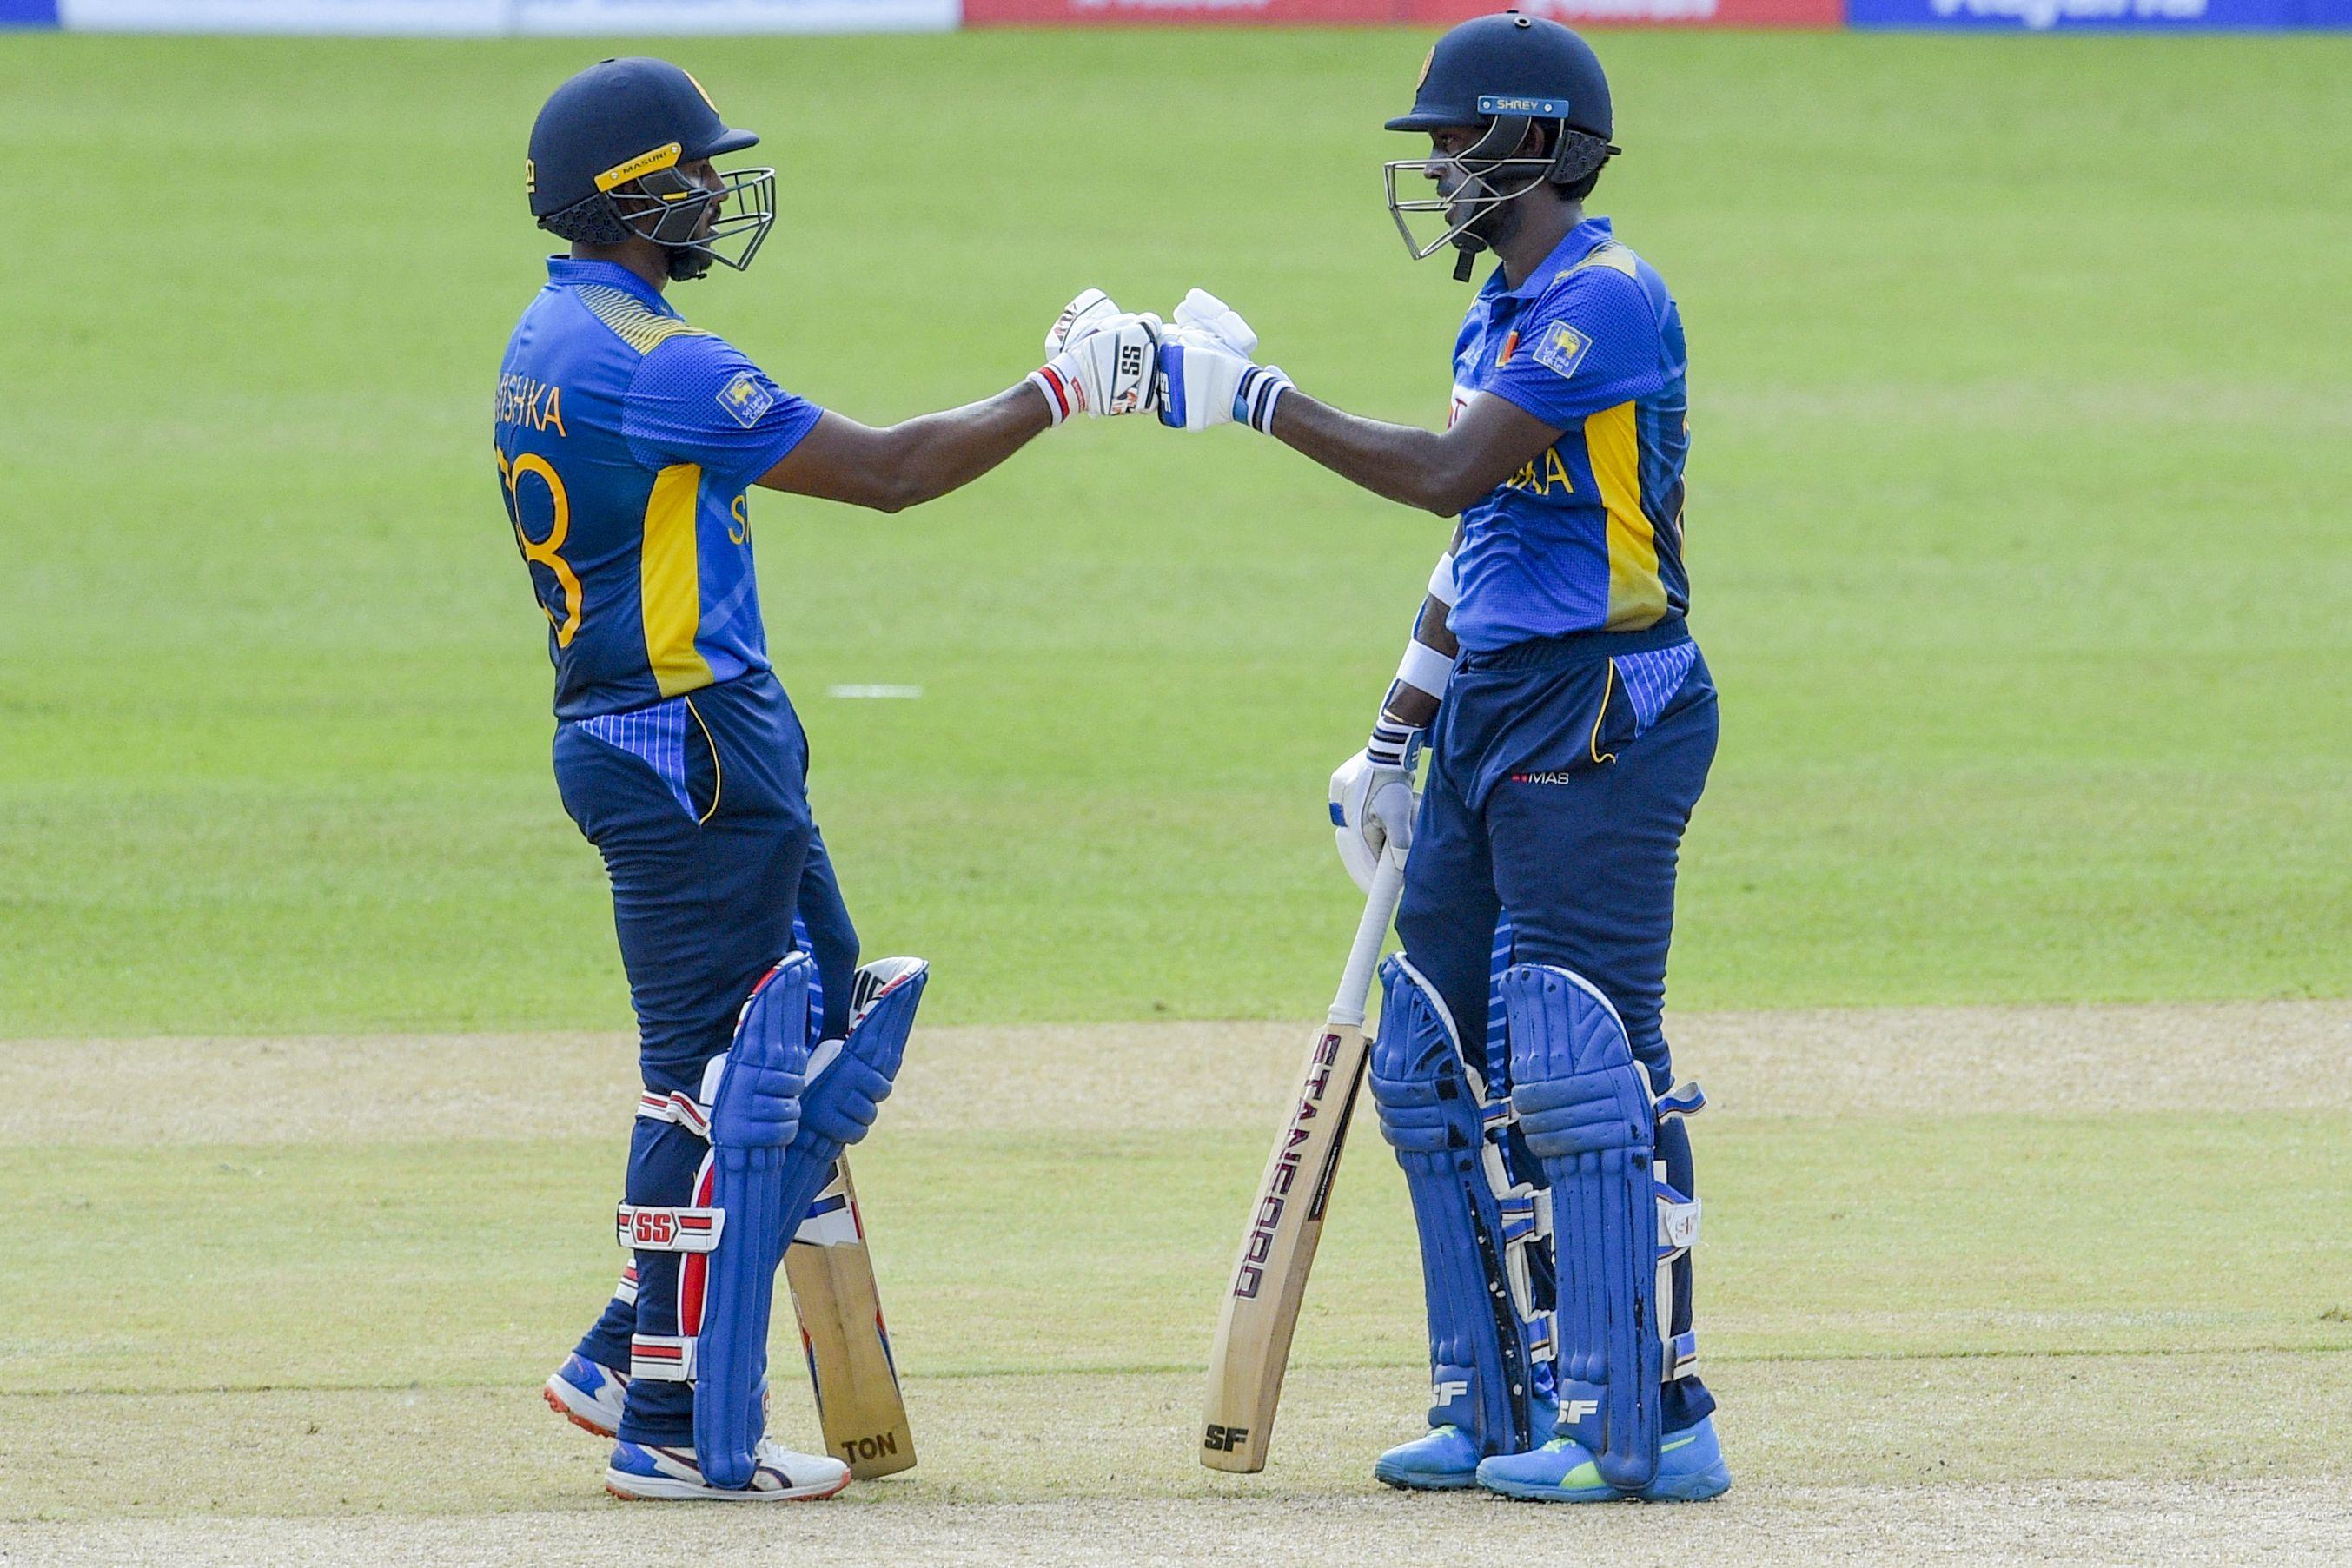 Sri Lanka fined for slow over-rate in second ODI against India